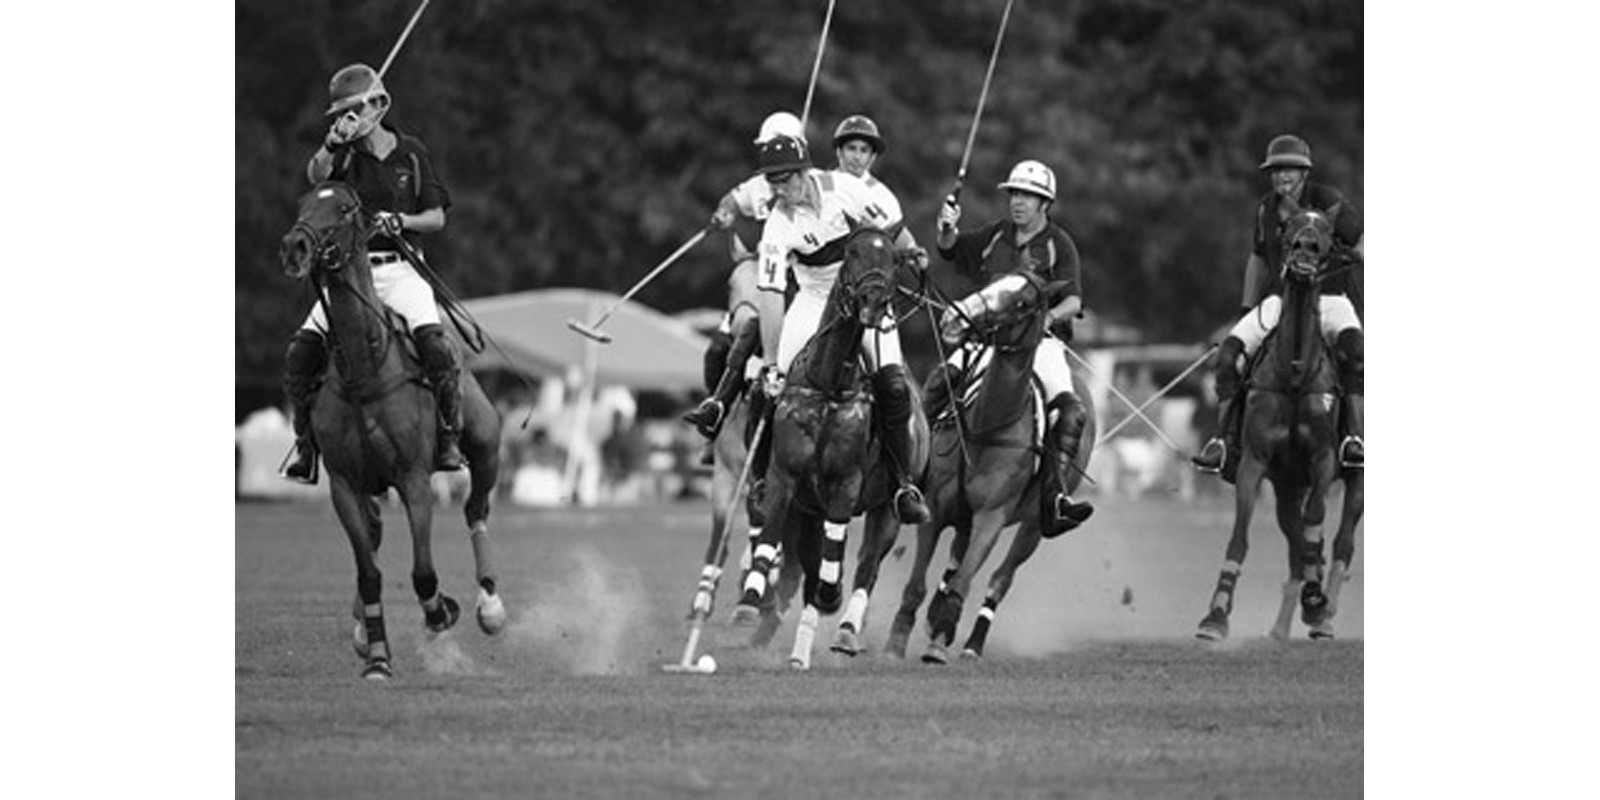 Anonymous - Polo players, New York